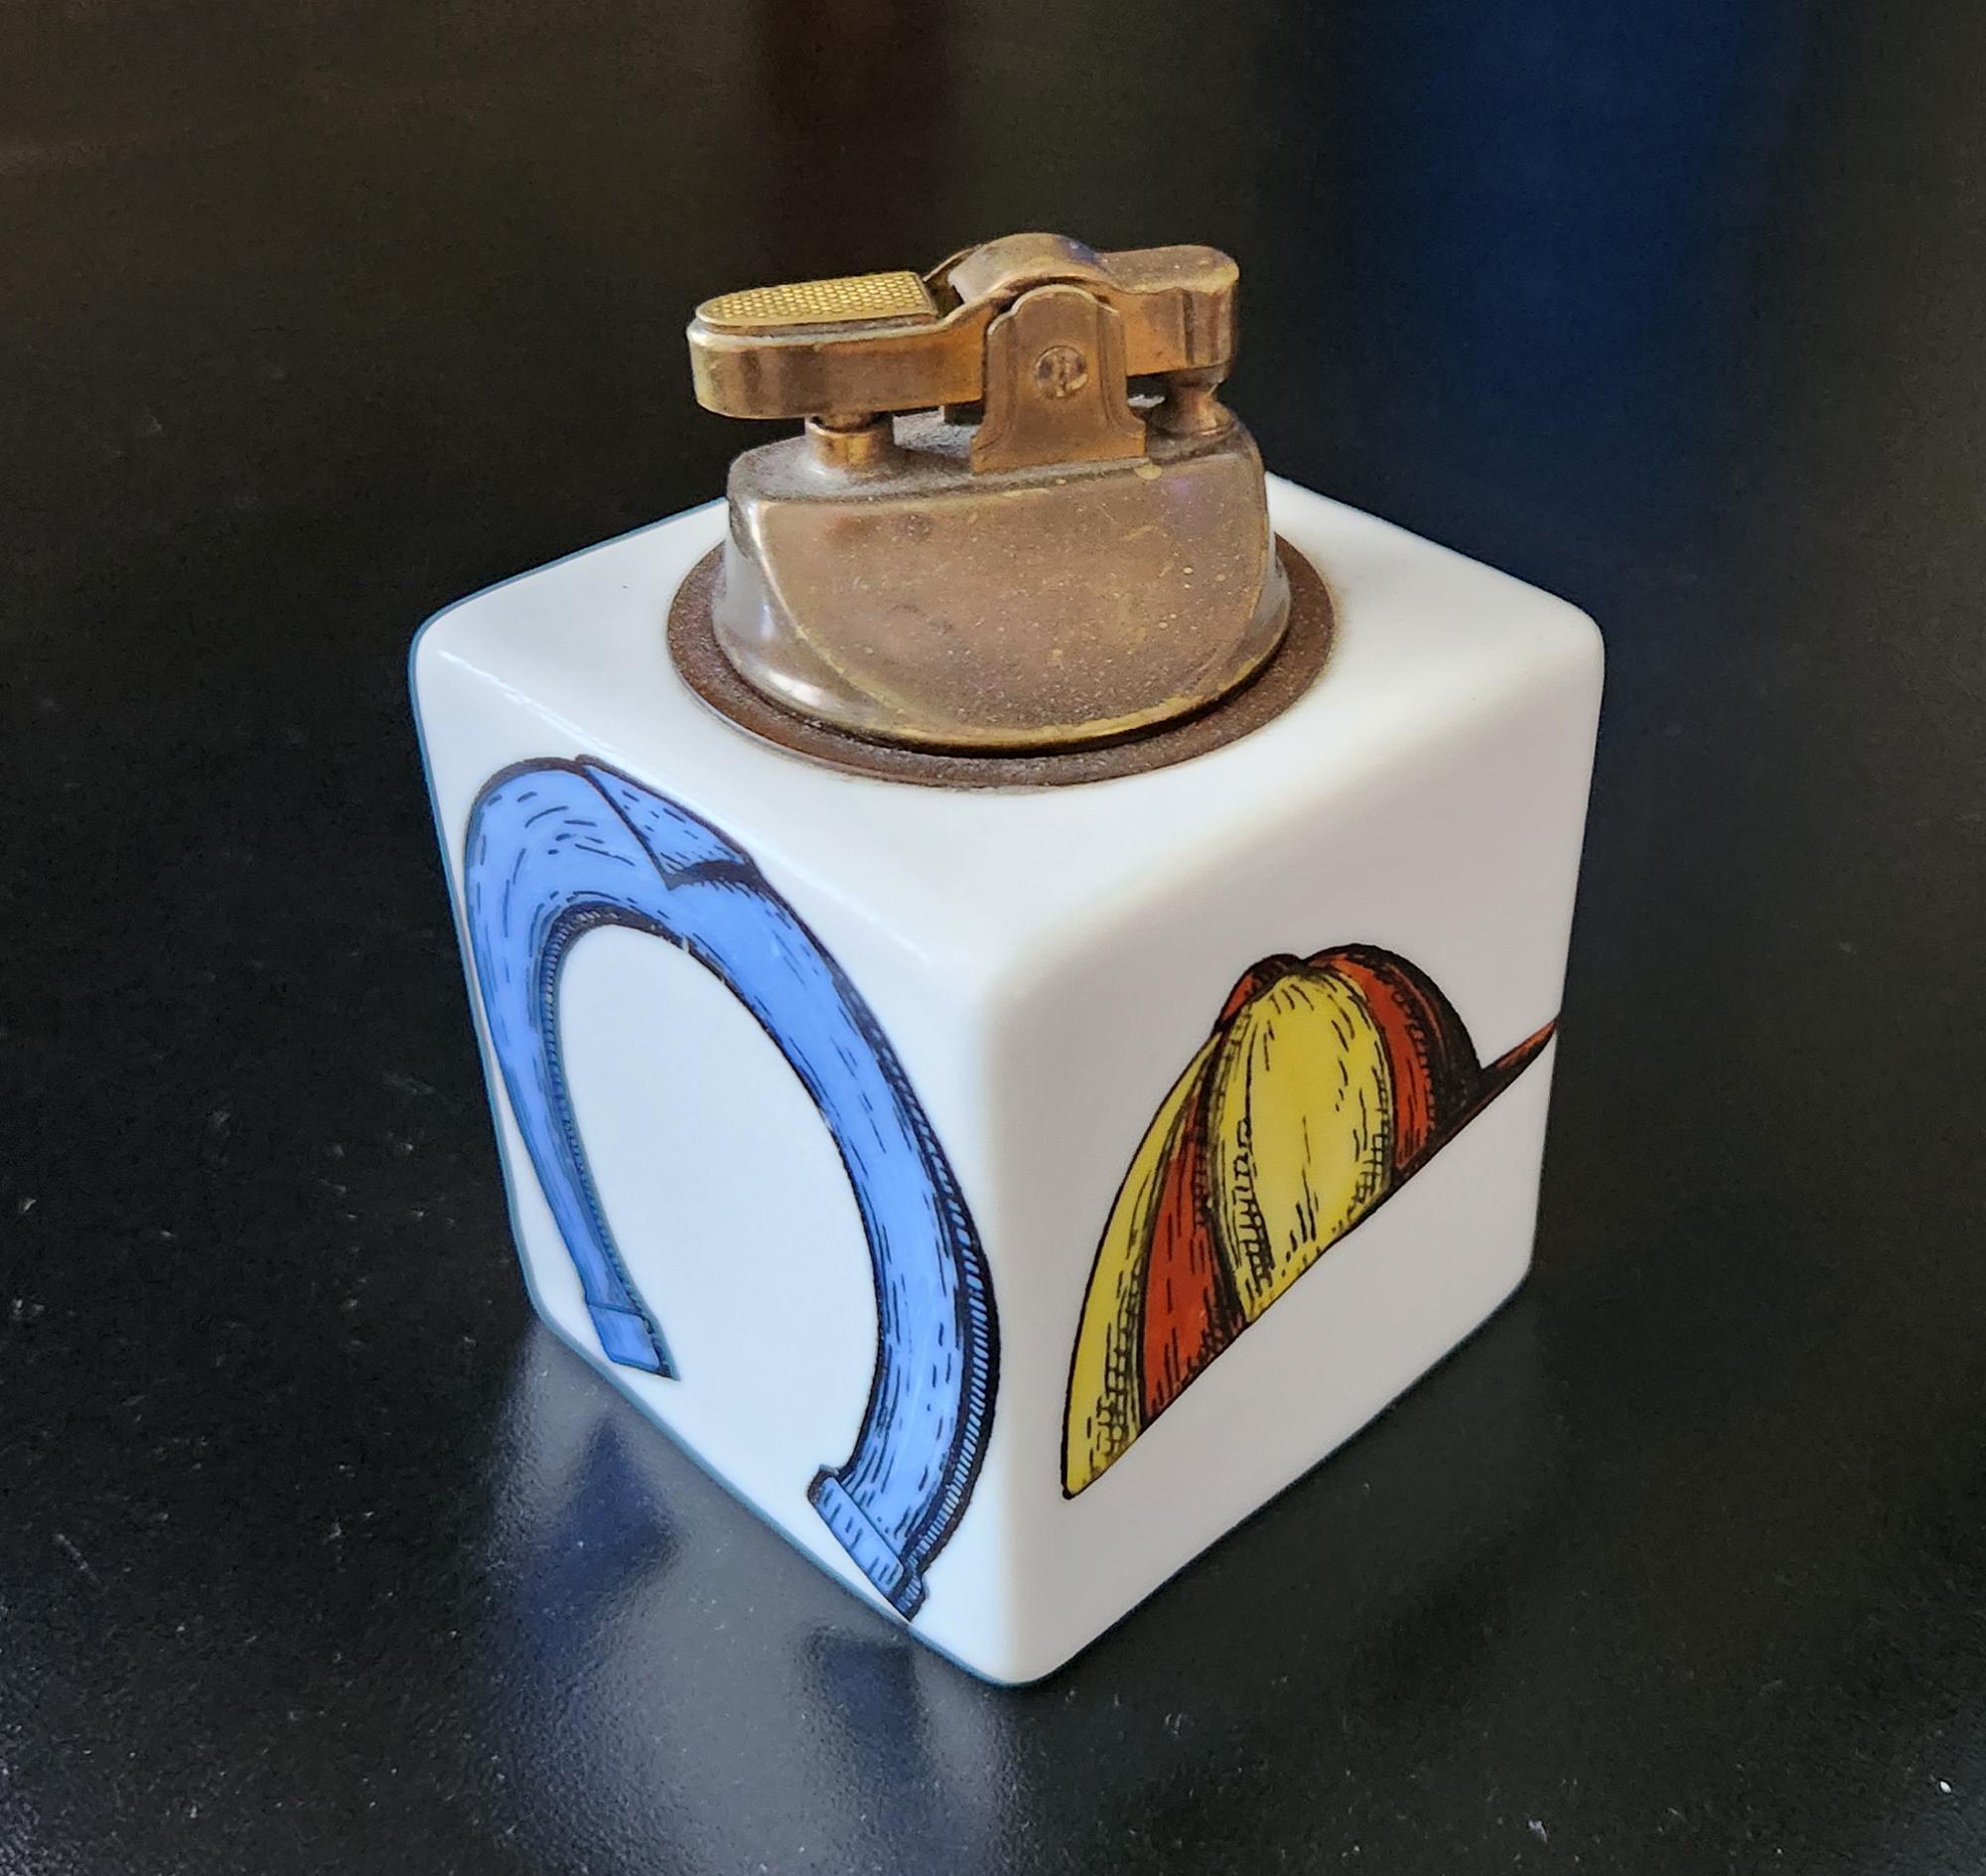 Piero Fornasetti Horse Racing Ceramic Lighter,
Circa 1960s

The Fornasetti ceramic lighter is of square form with images related to horse racing on each side- a horse shoe, a racing jockey cap, a horse bit and a spur.  The interior hollow.  The